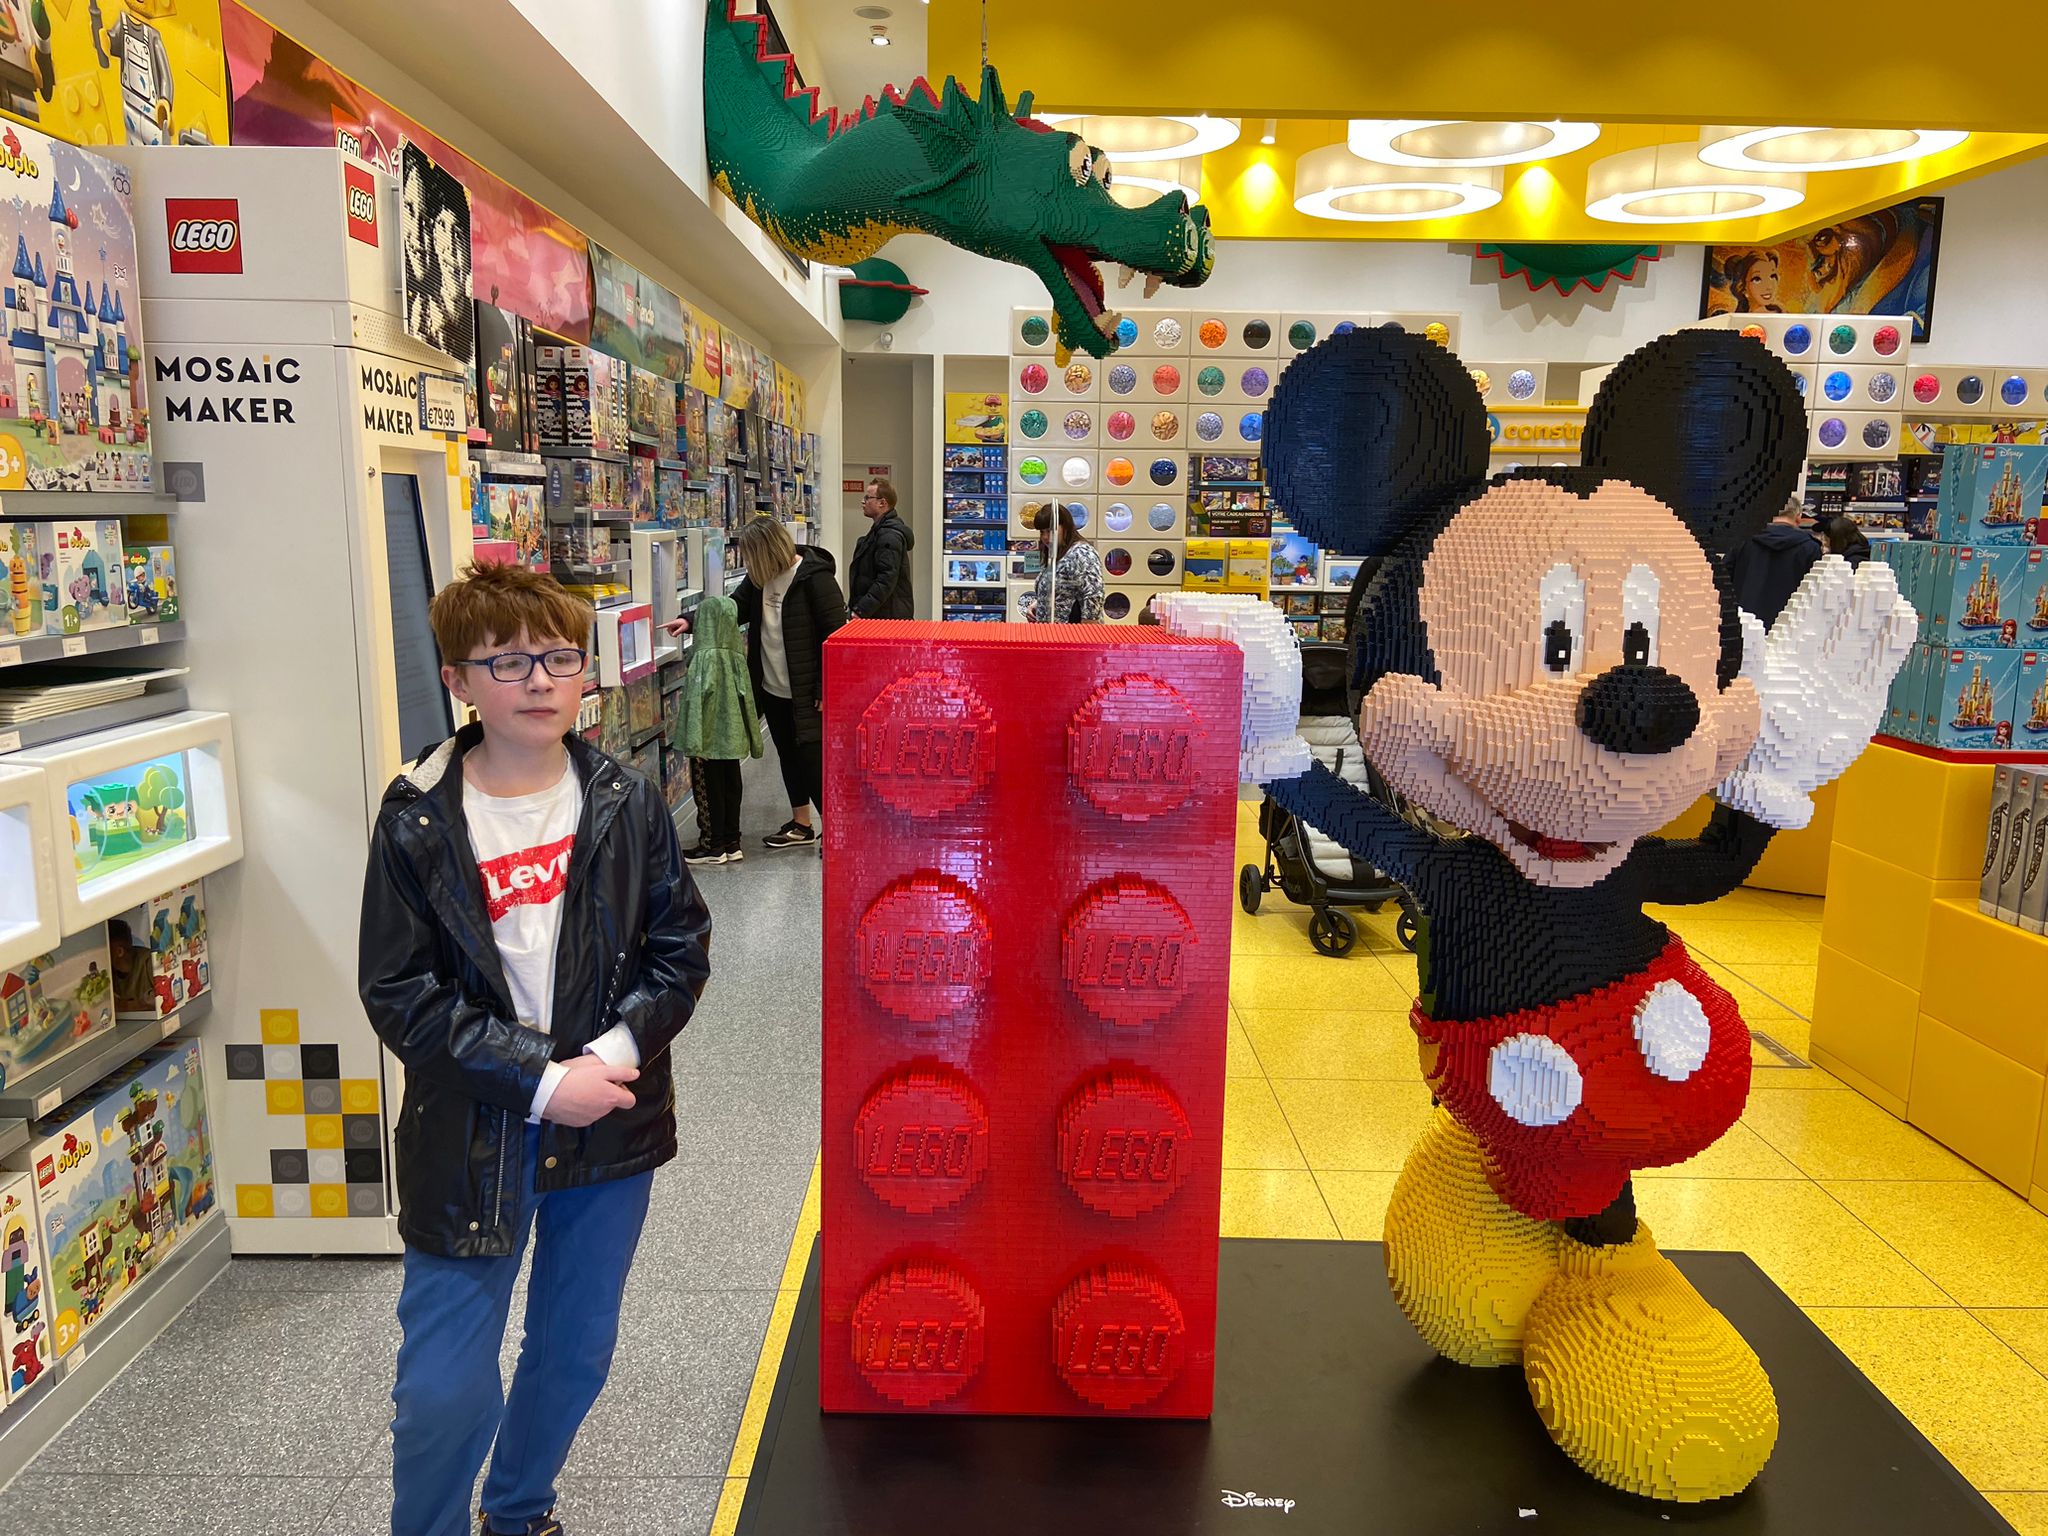 Expect a lego Mickey Mouse, pink turrets and waterfalls at Disneyland Paris